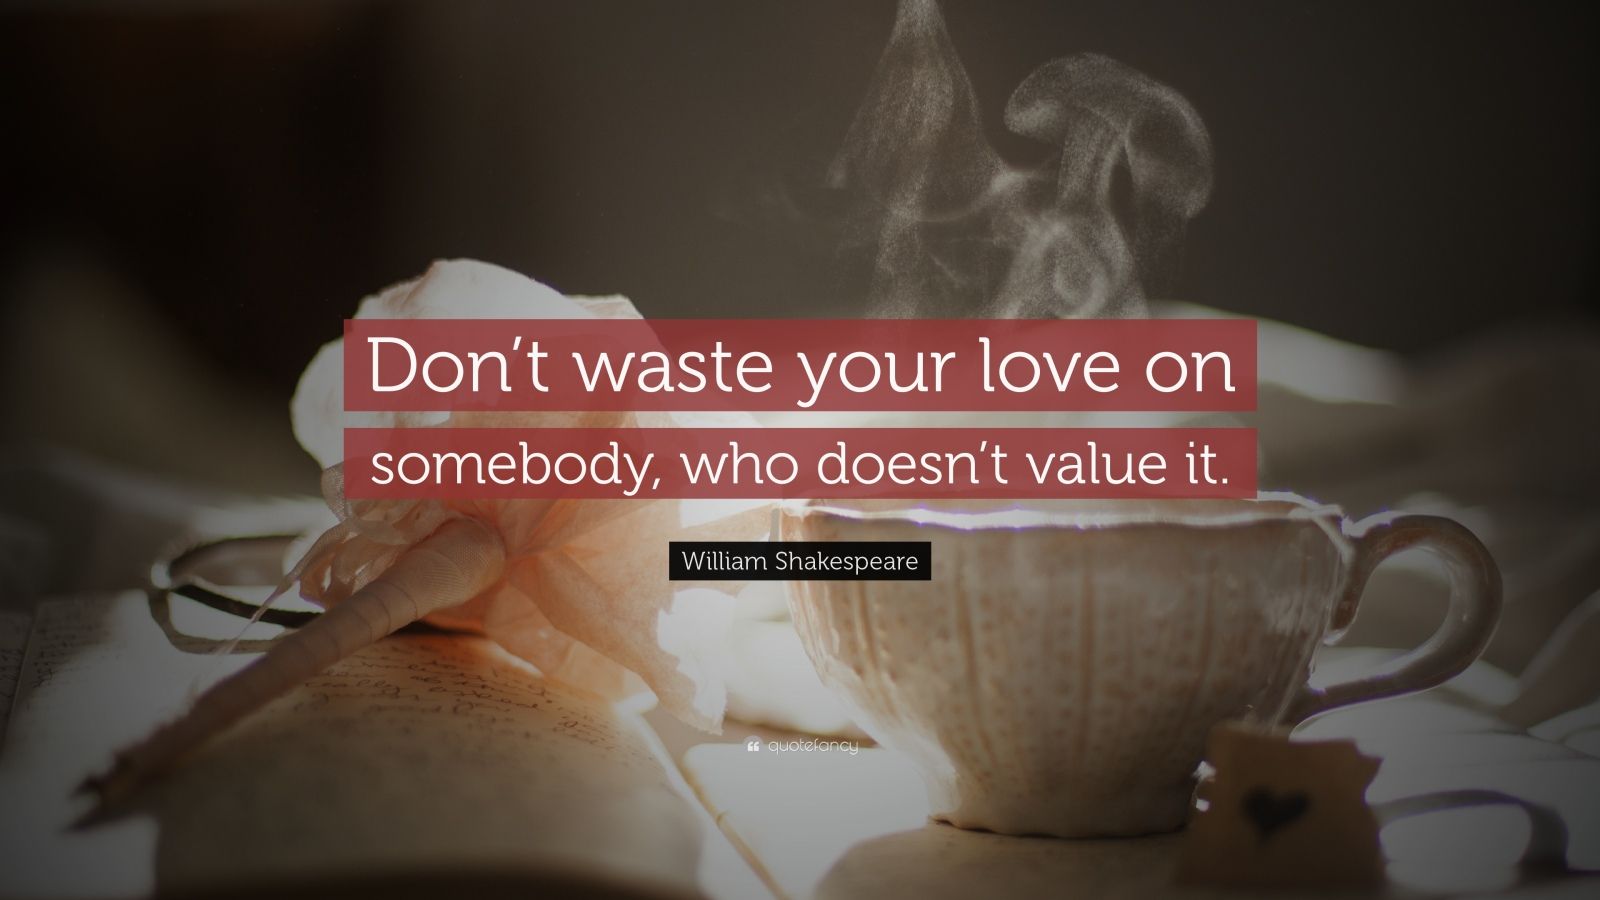 William Shakespeare Quote “Don t waste your love on somebody who doesn